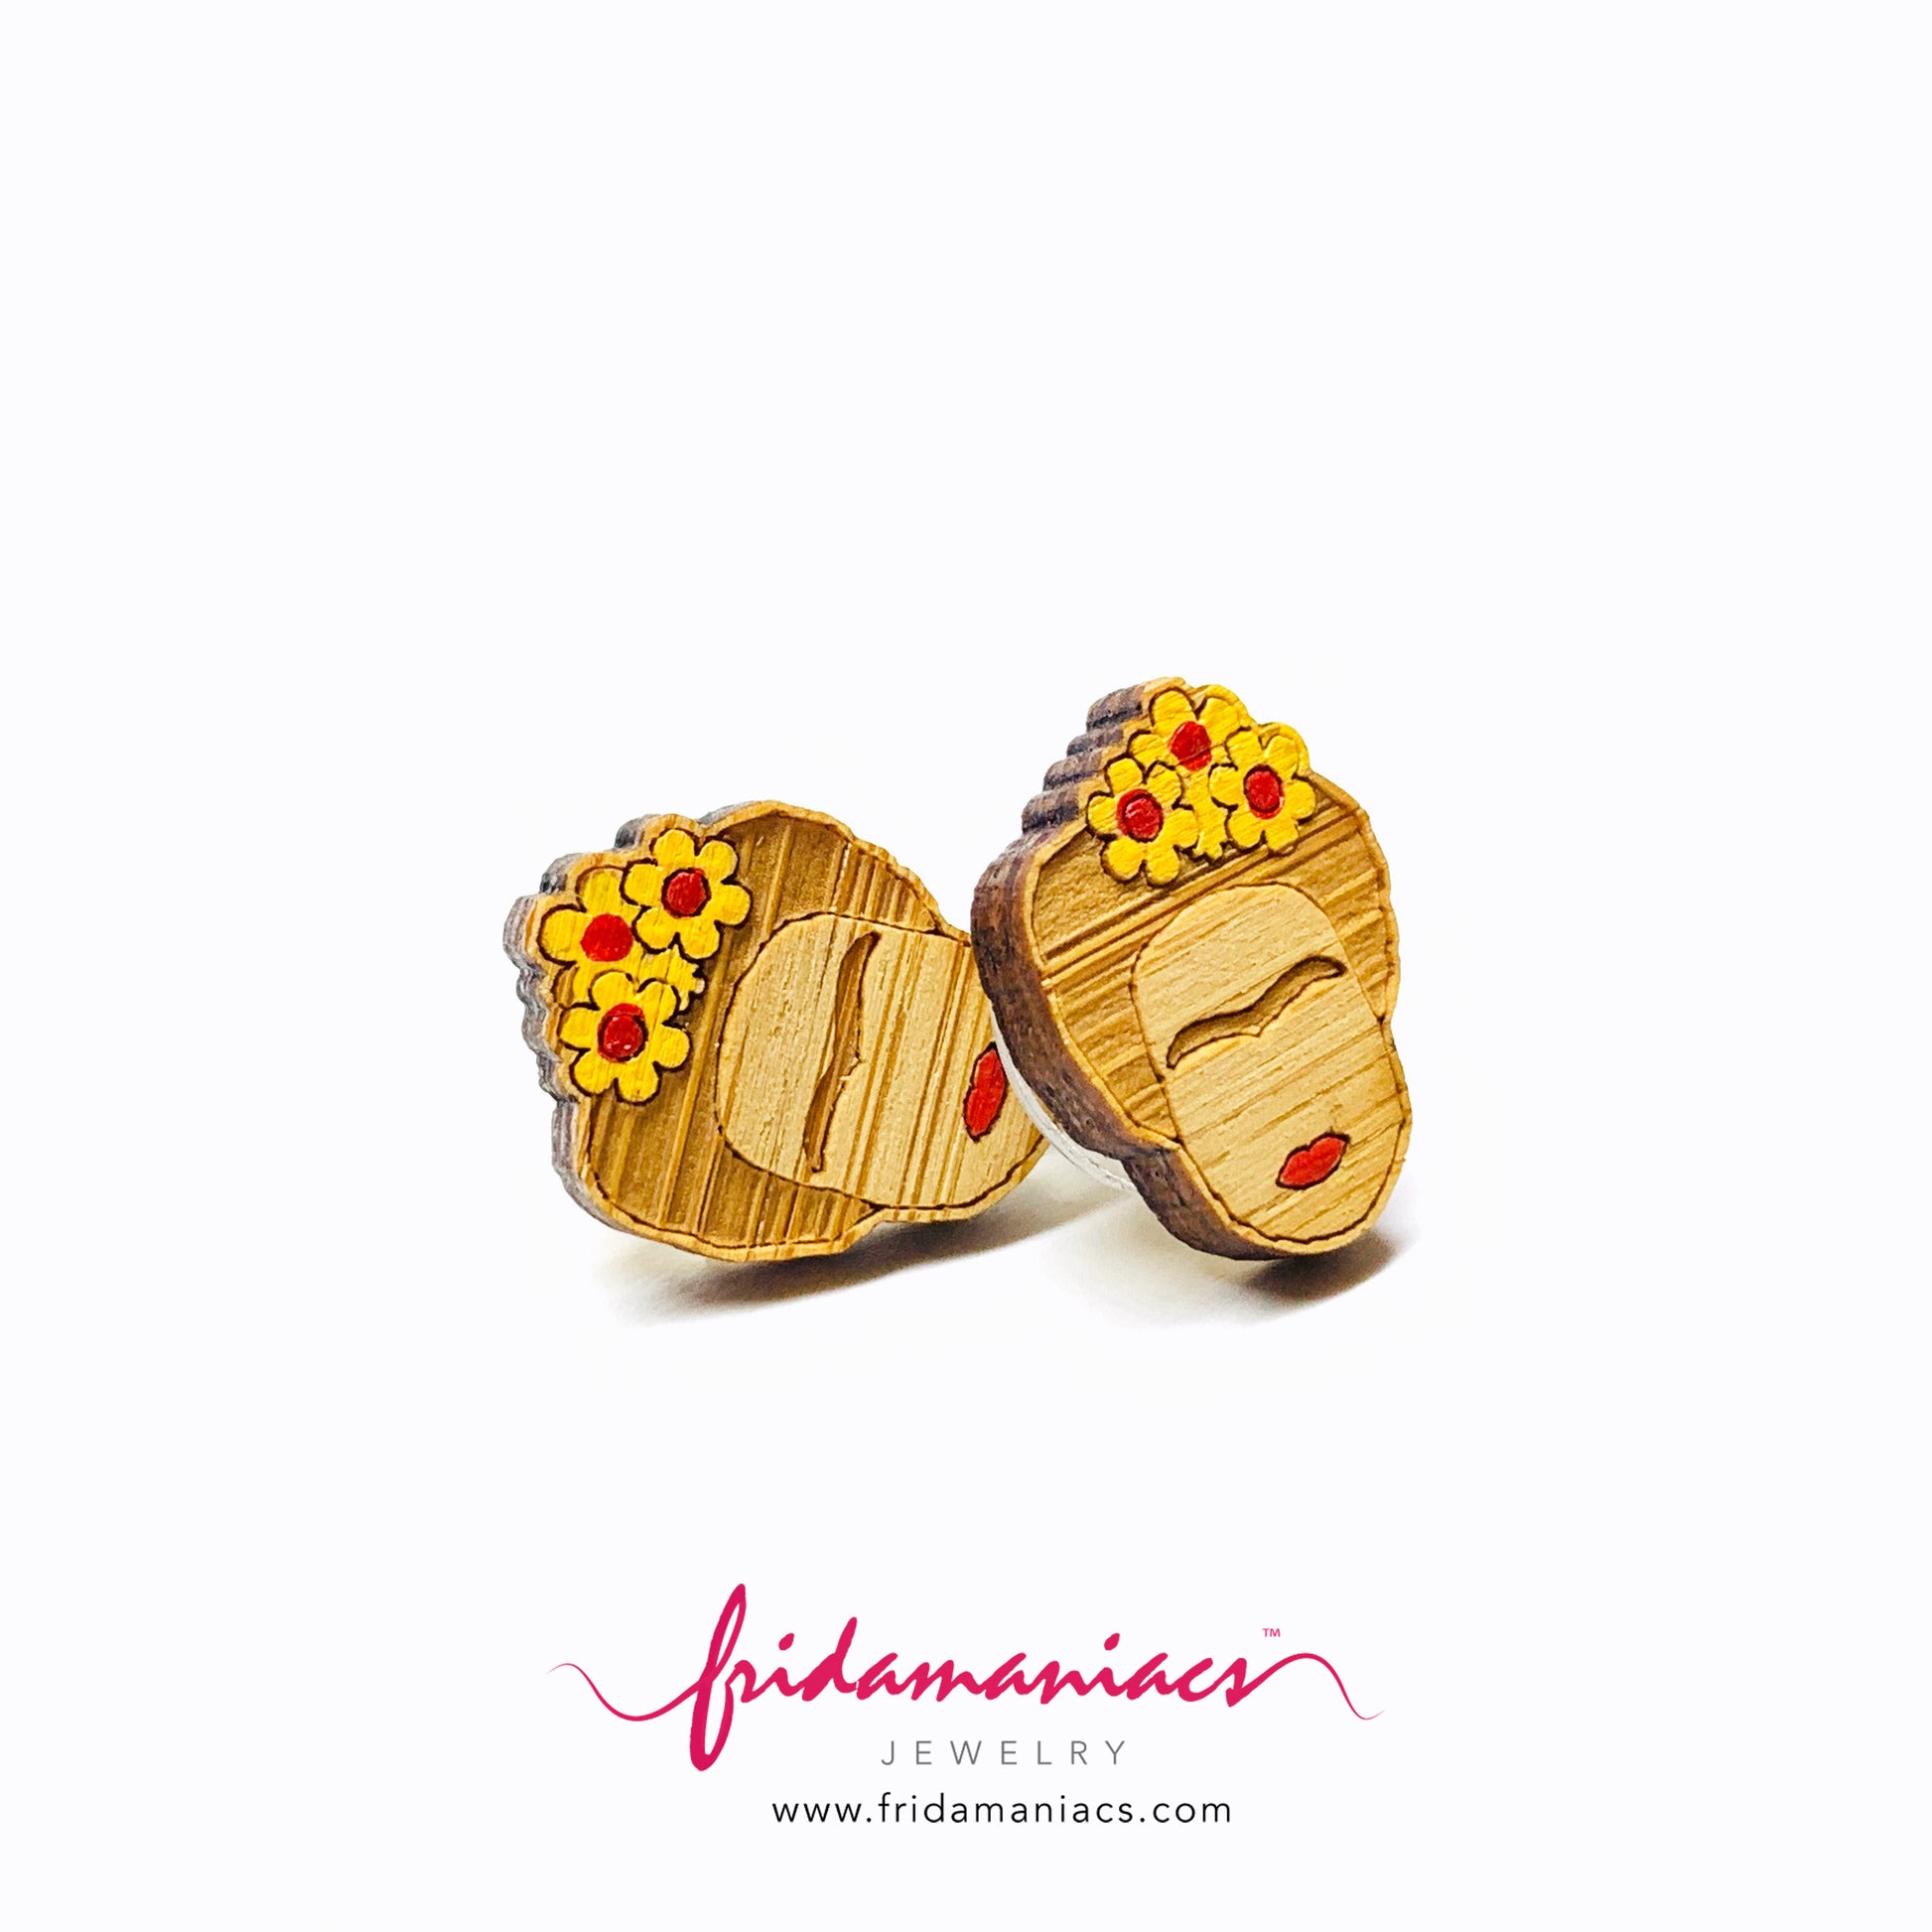 Frida Earrings: Hand painted bamboo wooden Frida Kahlo inspired stud earrings by Fridamaniacs for Fridalovers. Mexican jewelry. Girls Gift idea. Floral mini studs.